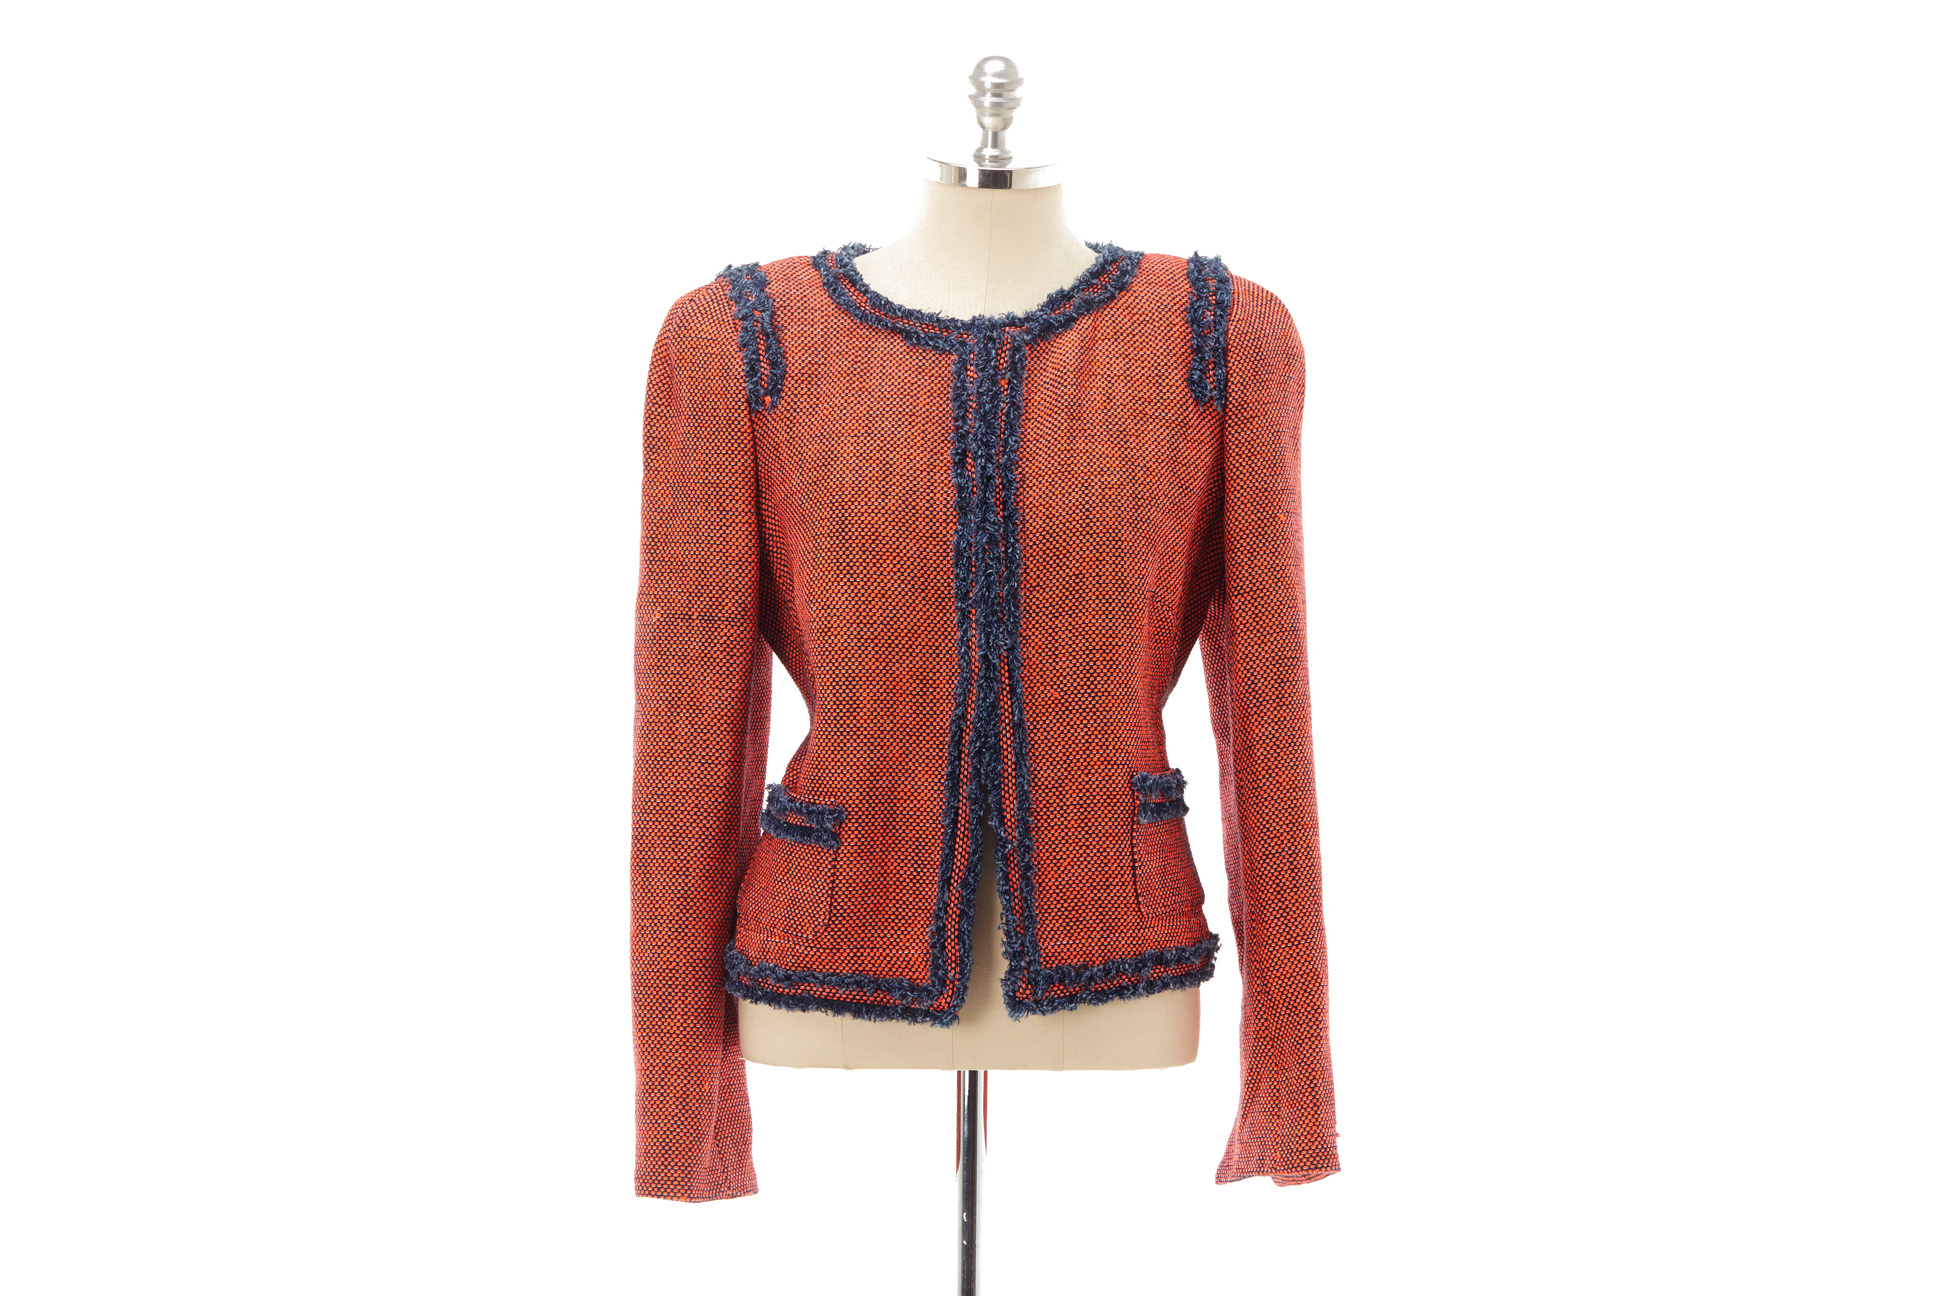 A WEILL RED TWEED JACKET